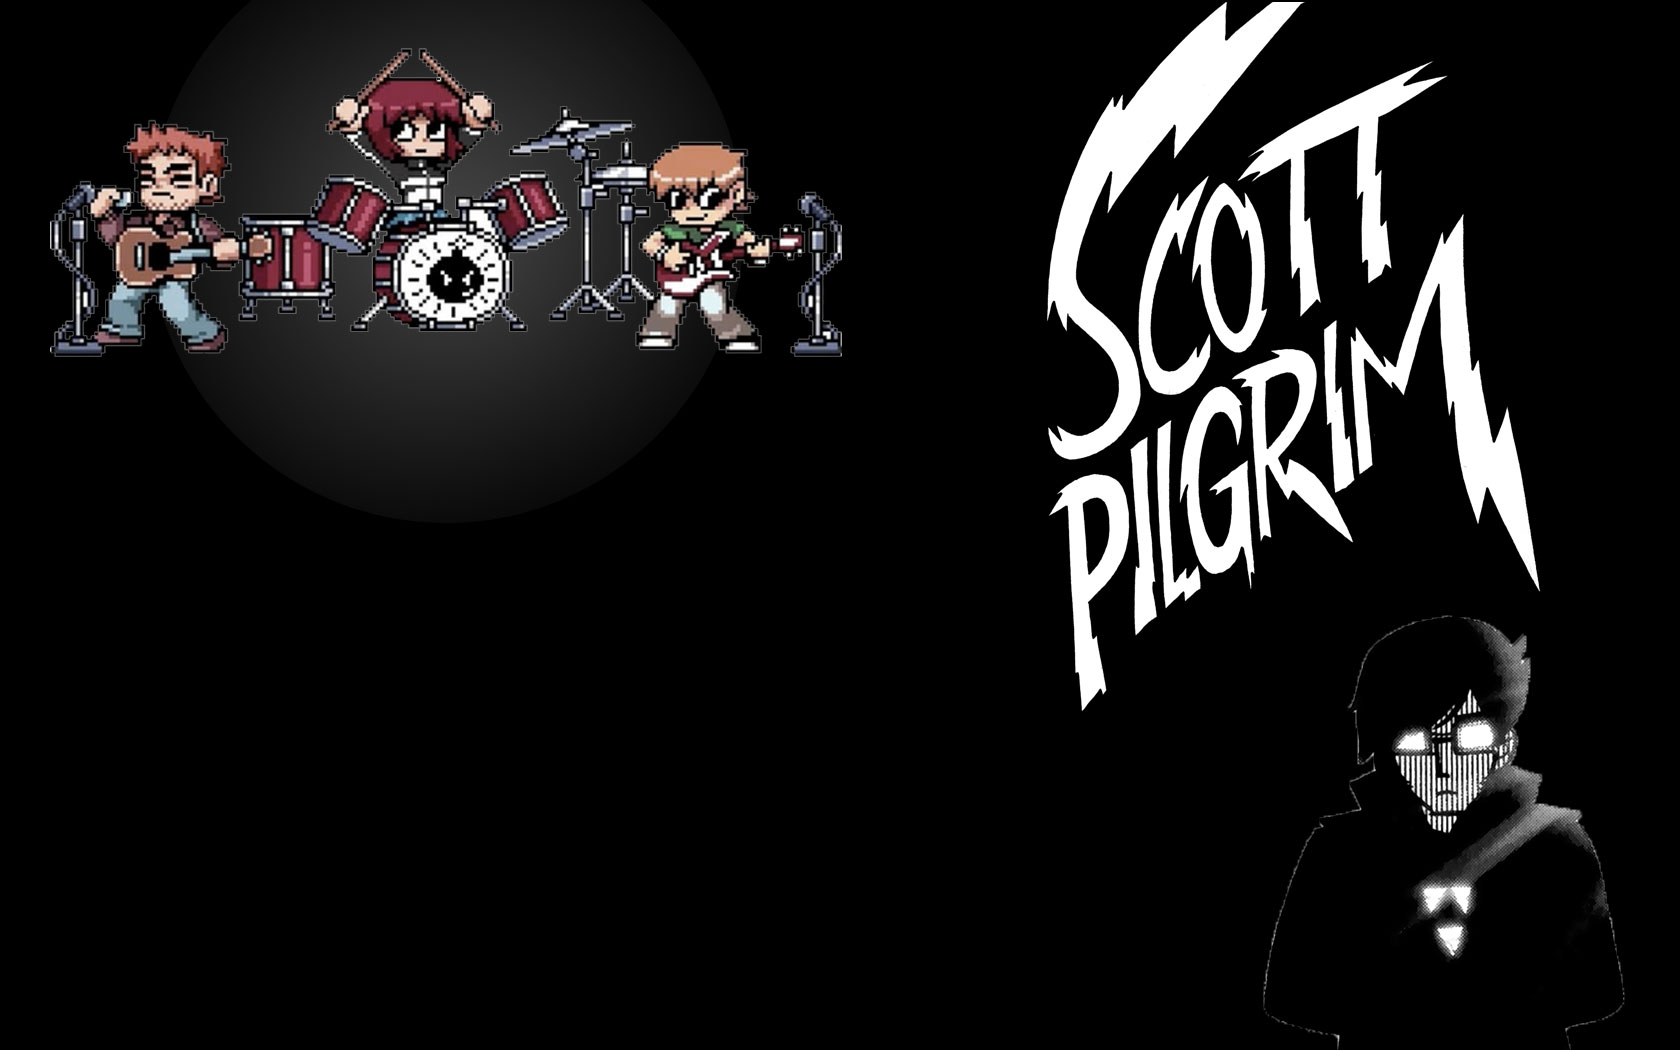 10 Scott Pilgrim HD Wallpapers and Backgrounds